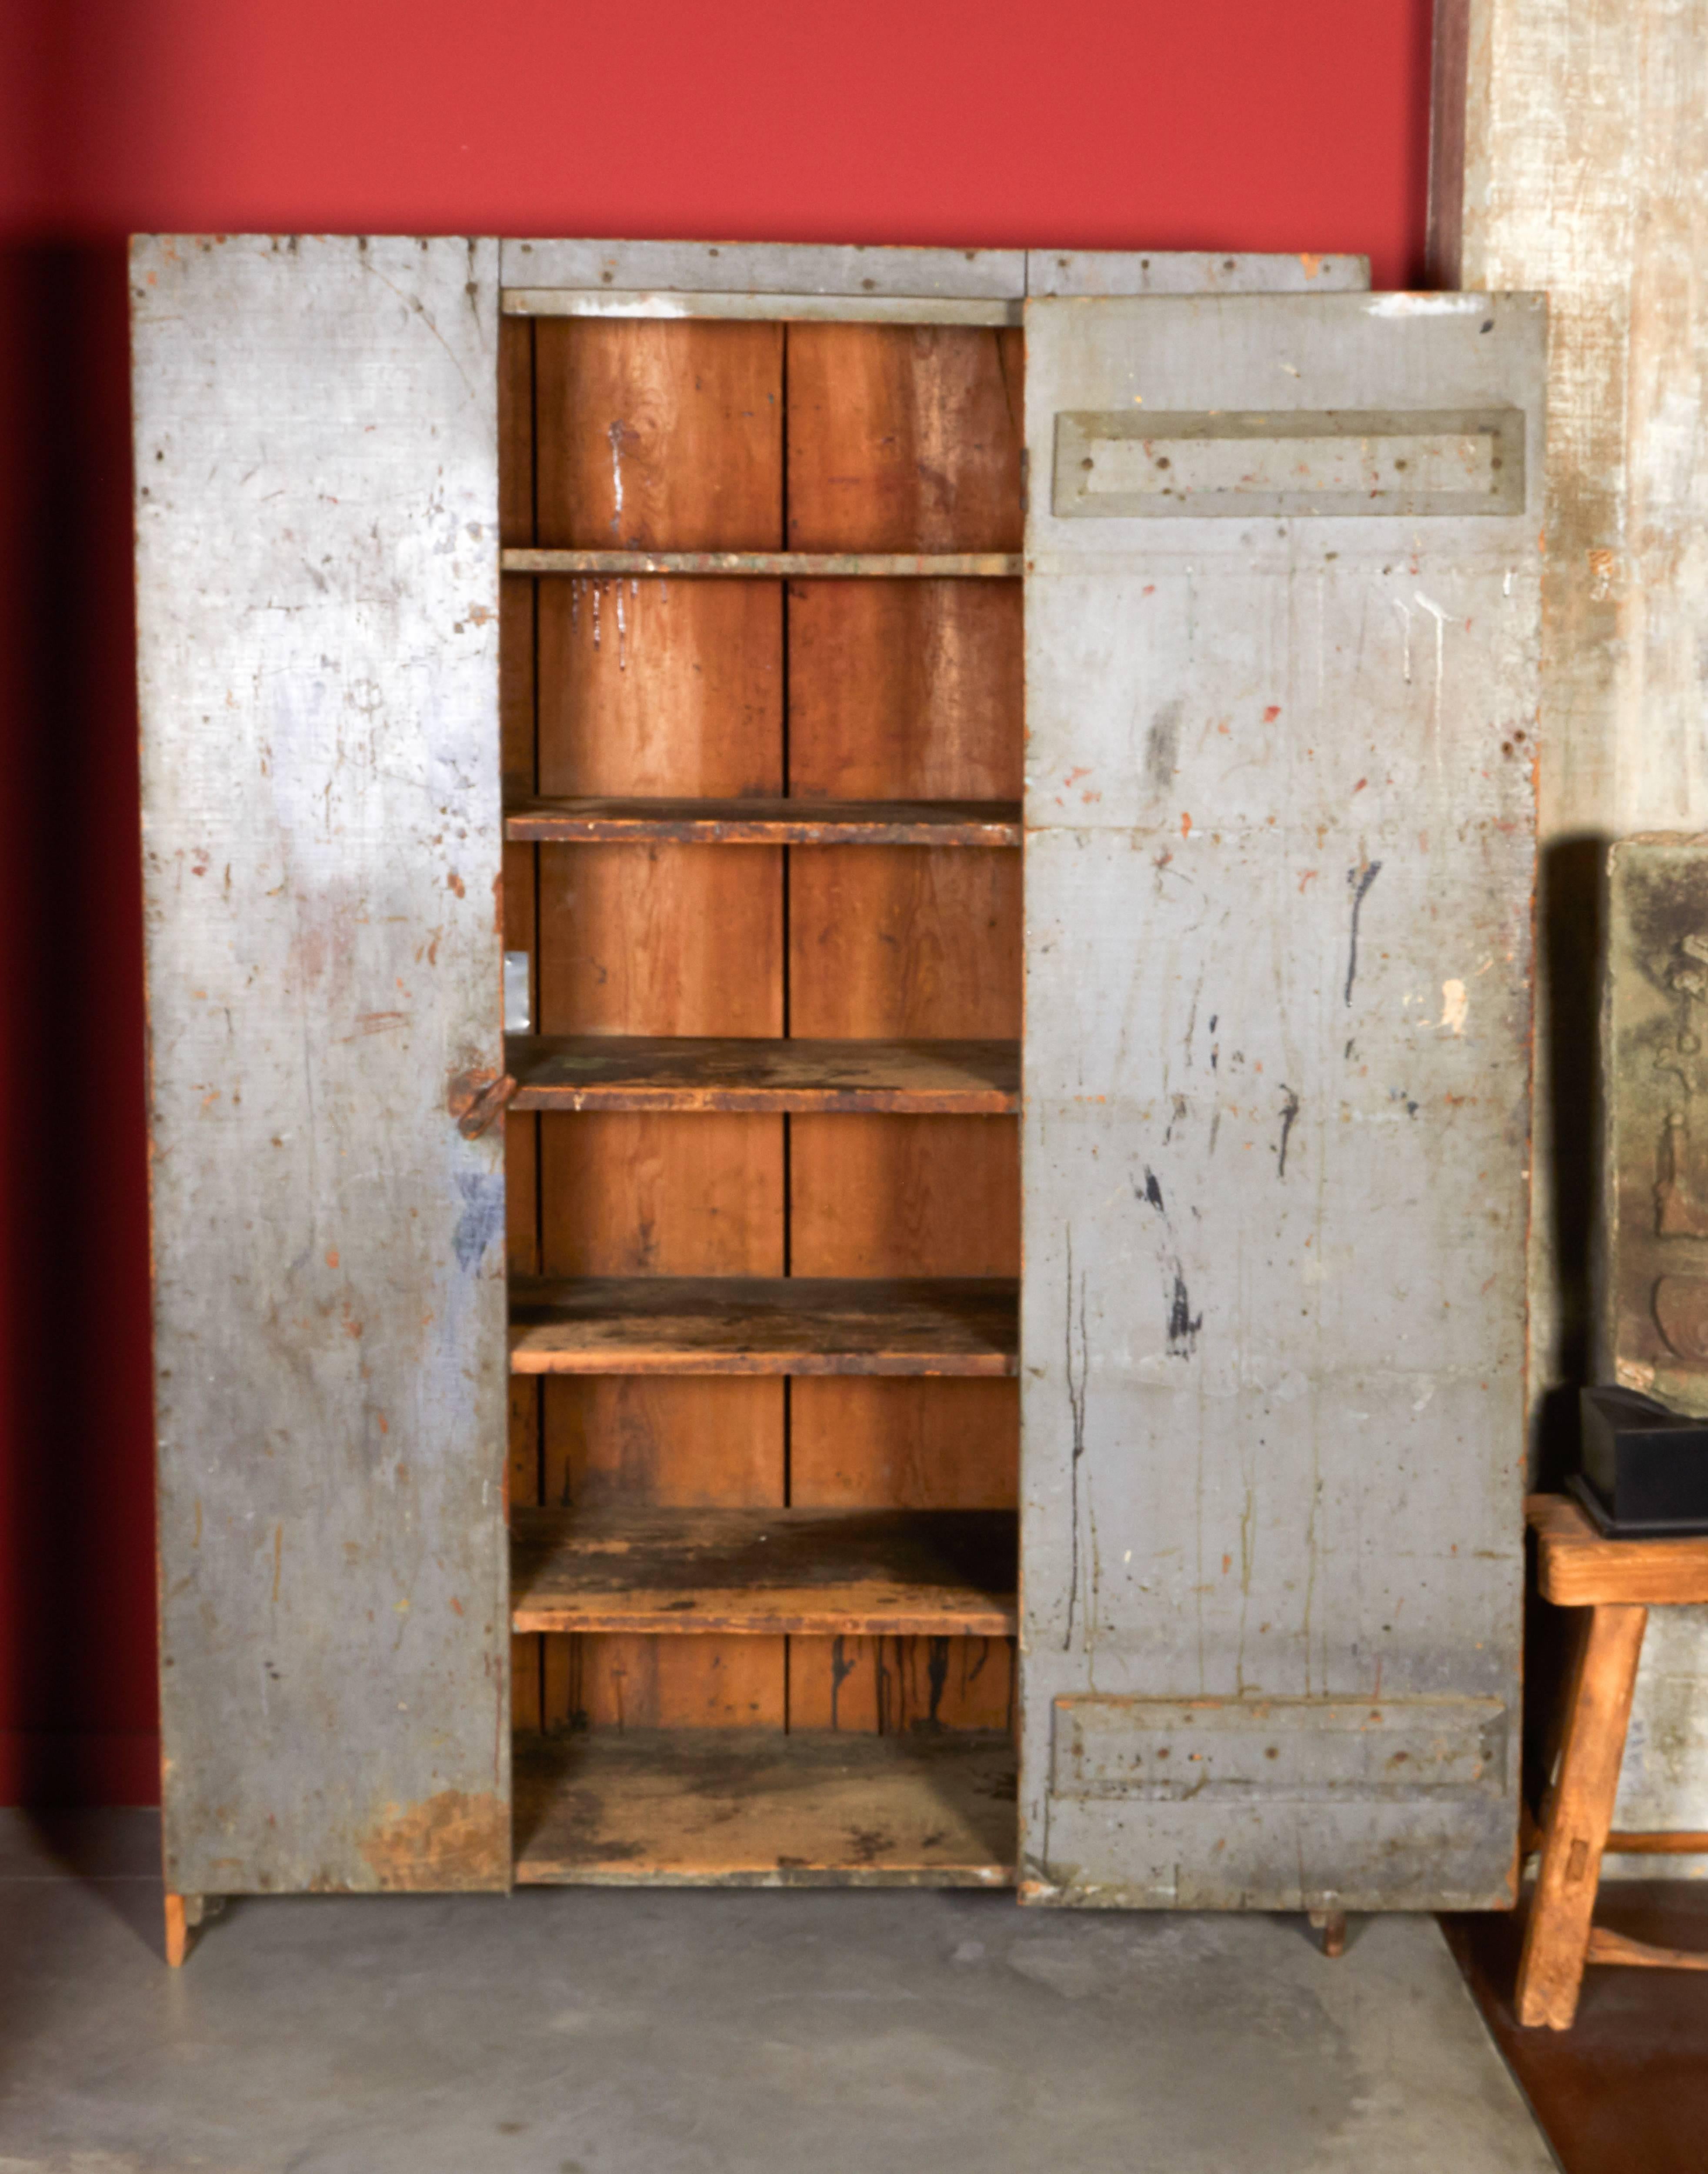 A large antique single door storage cupboard with perfectly faded blue or green paint. This piece has many shelves and old carved words on the door (see photos) which add to the interest and quirkiness of the cabinet. Pieces like this with original